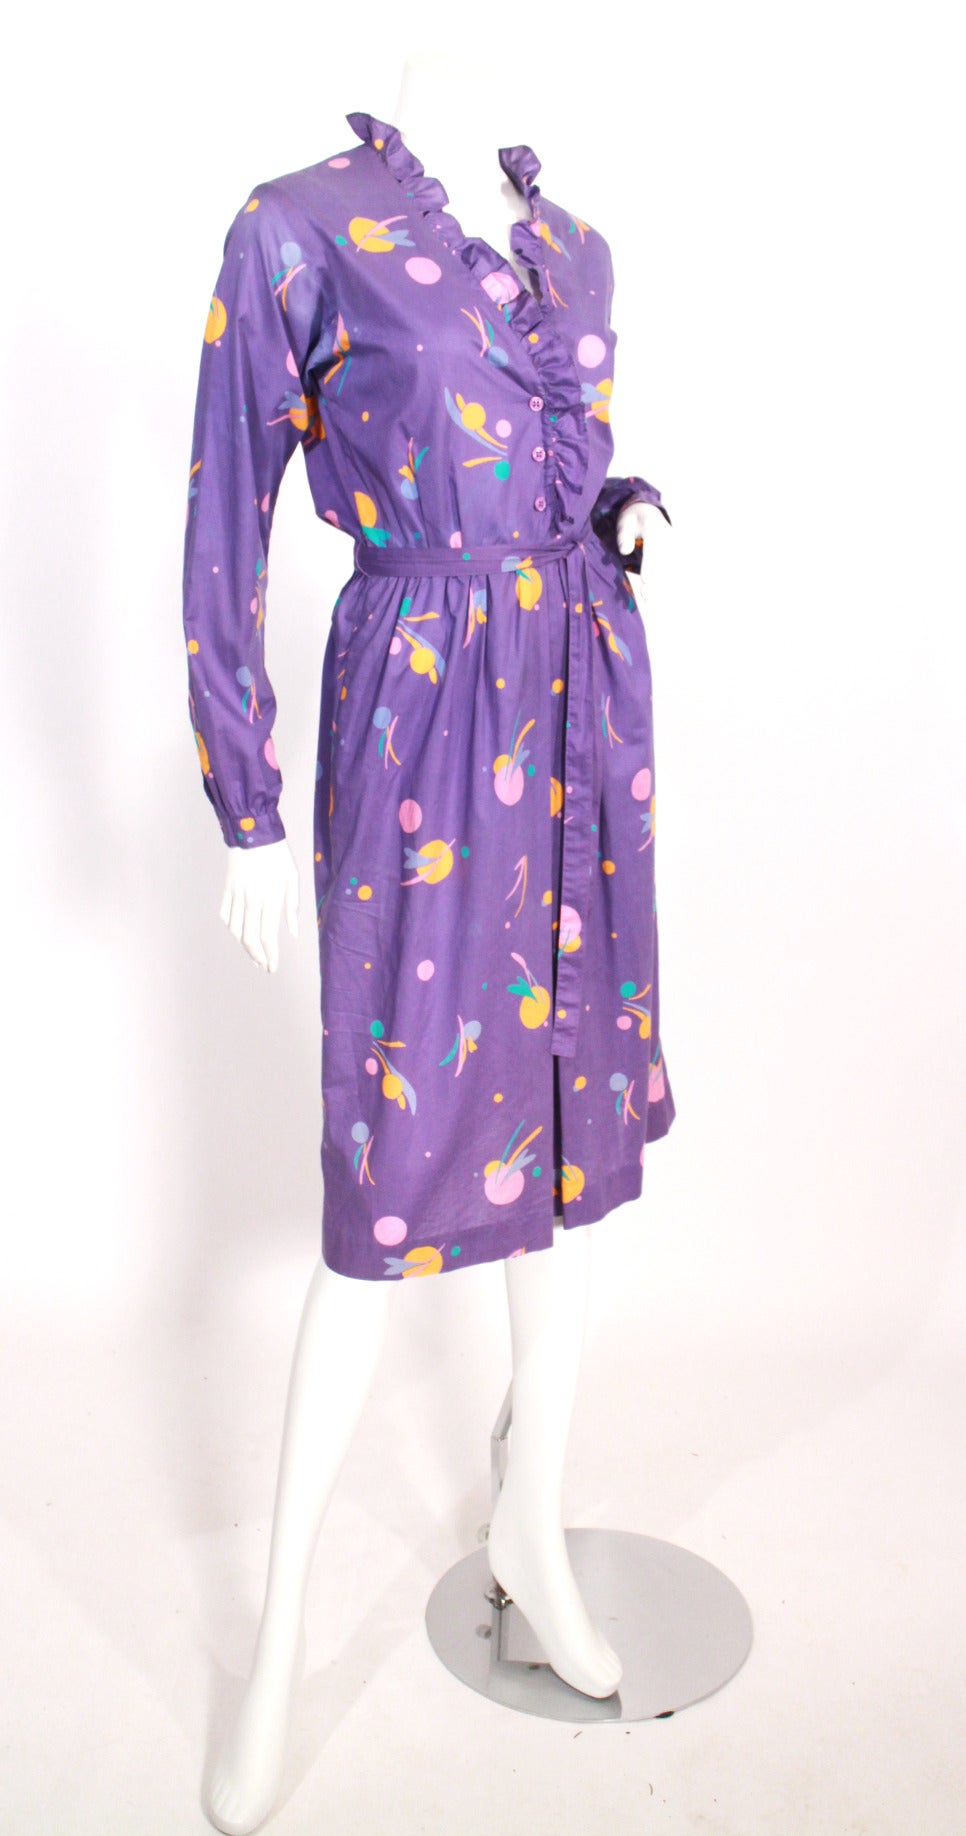 1970s/1980s Diane Von Furstenberg shirtdress. Featuring a super fun colorful print, belt at waist, and pockets. Perfect for this summer, day to night!

Arm Length: 24 in. (buttoned cuff's at wrist)